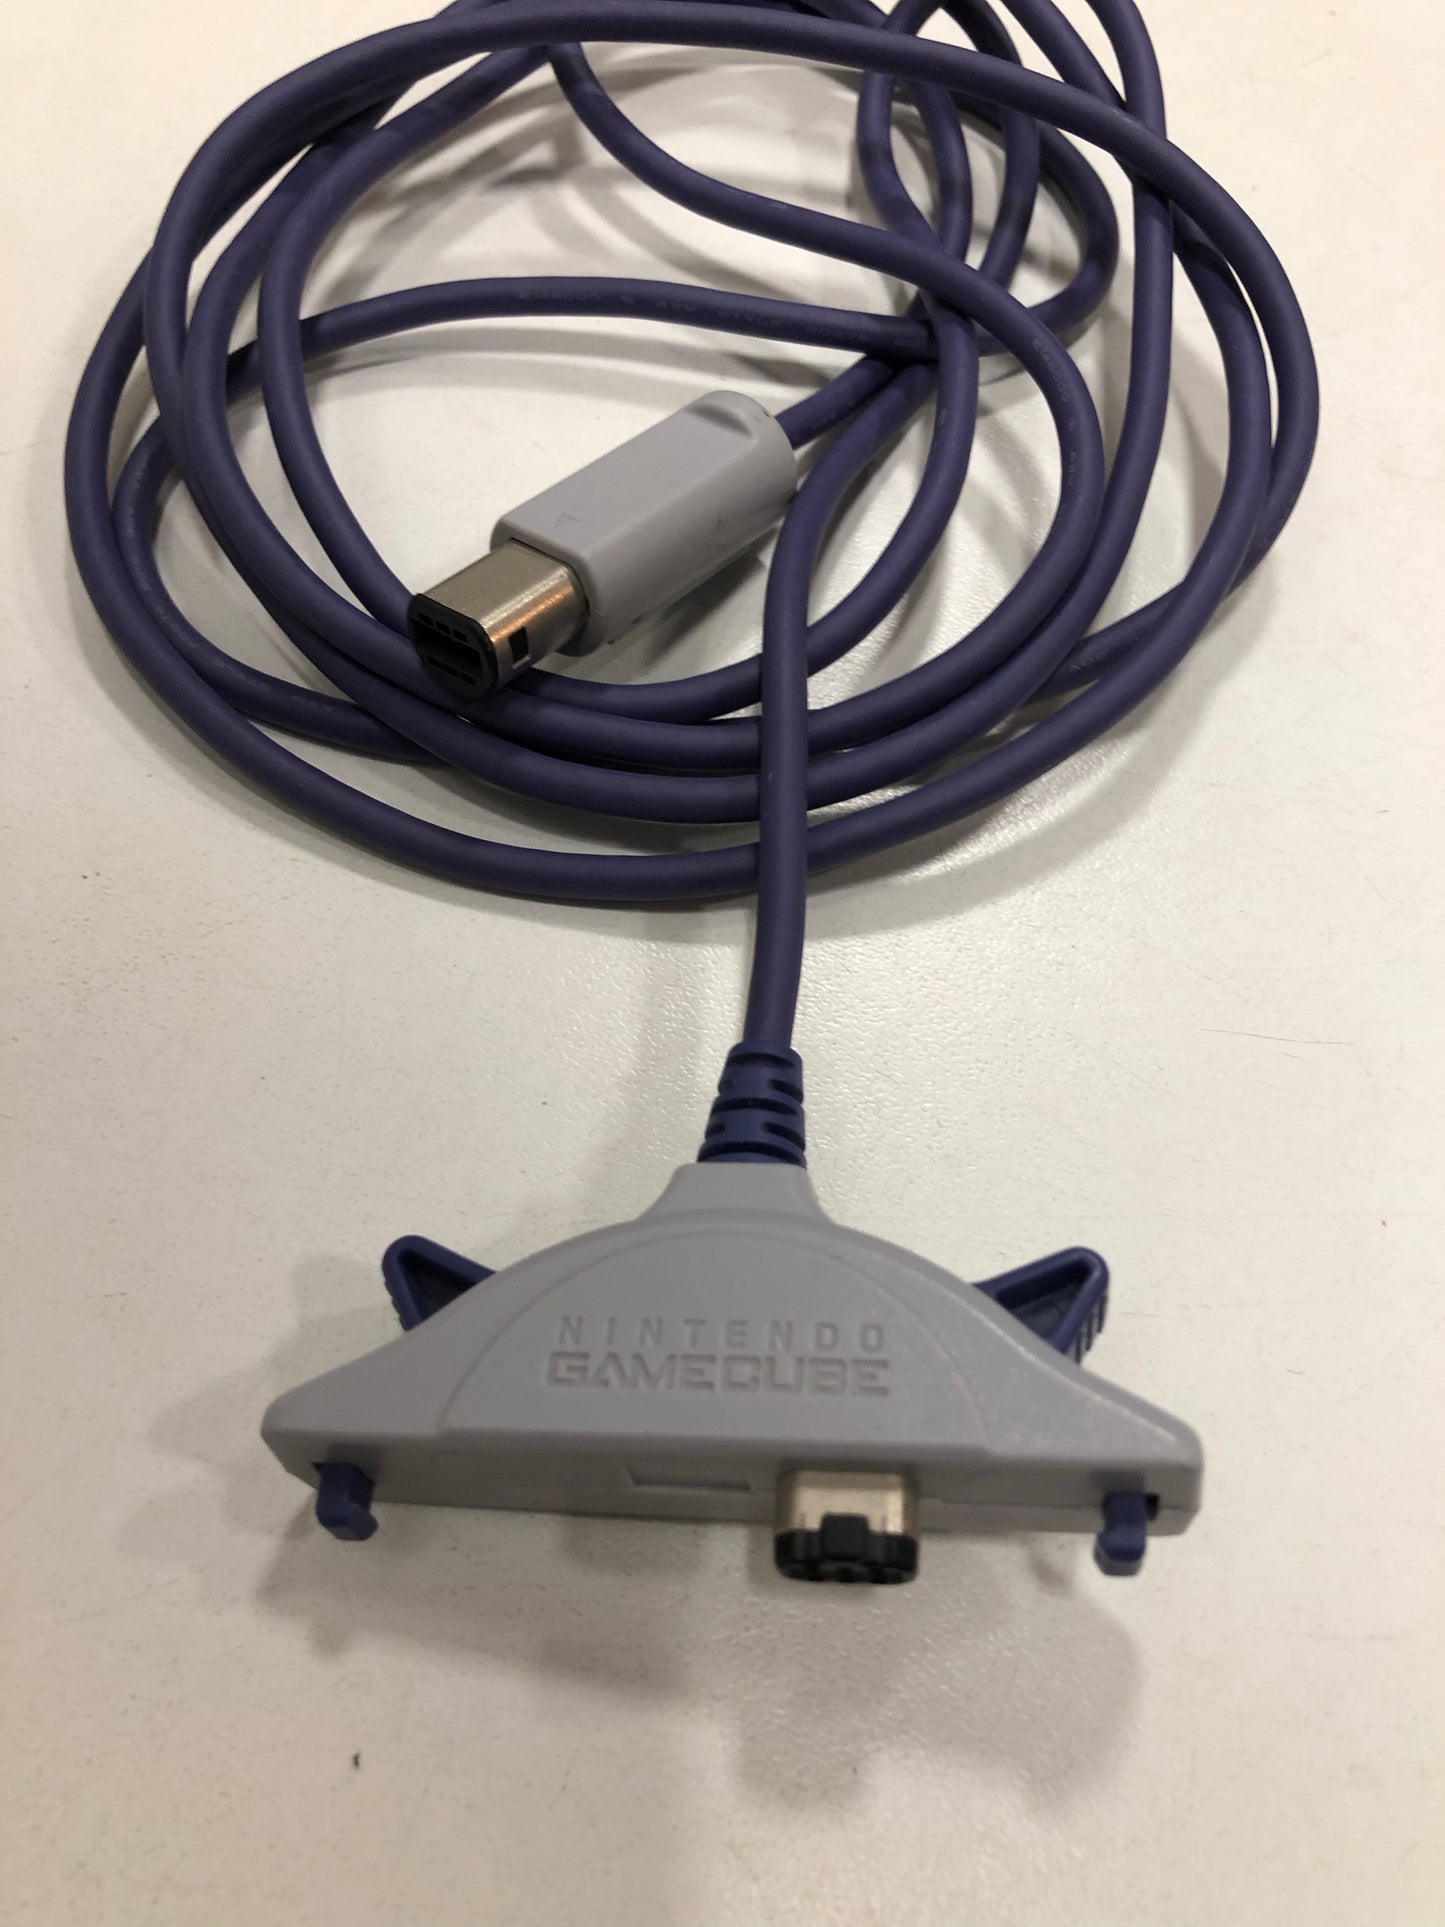 Cable link Nintendo Game cube / Game boy advance